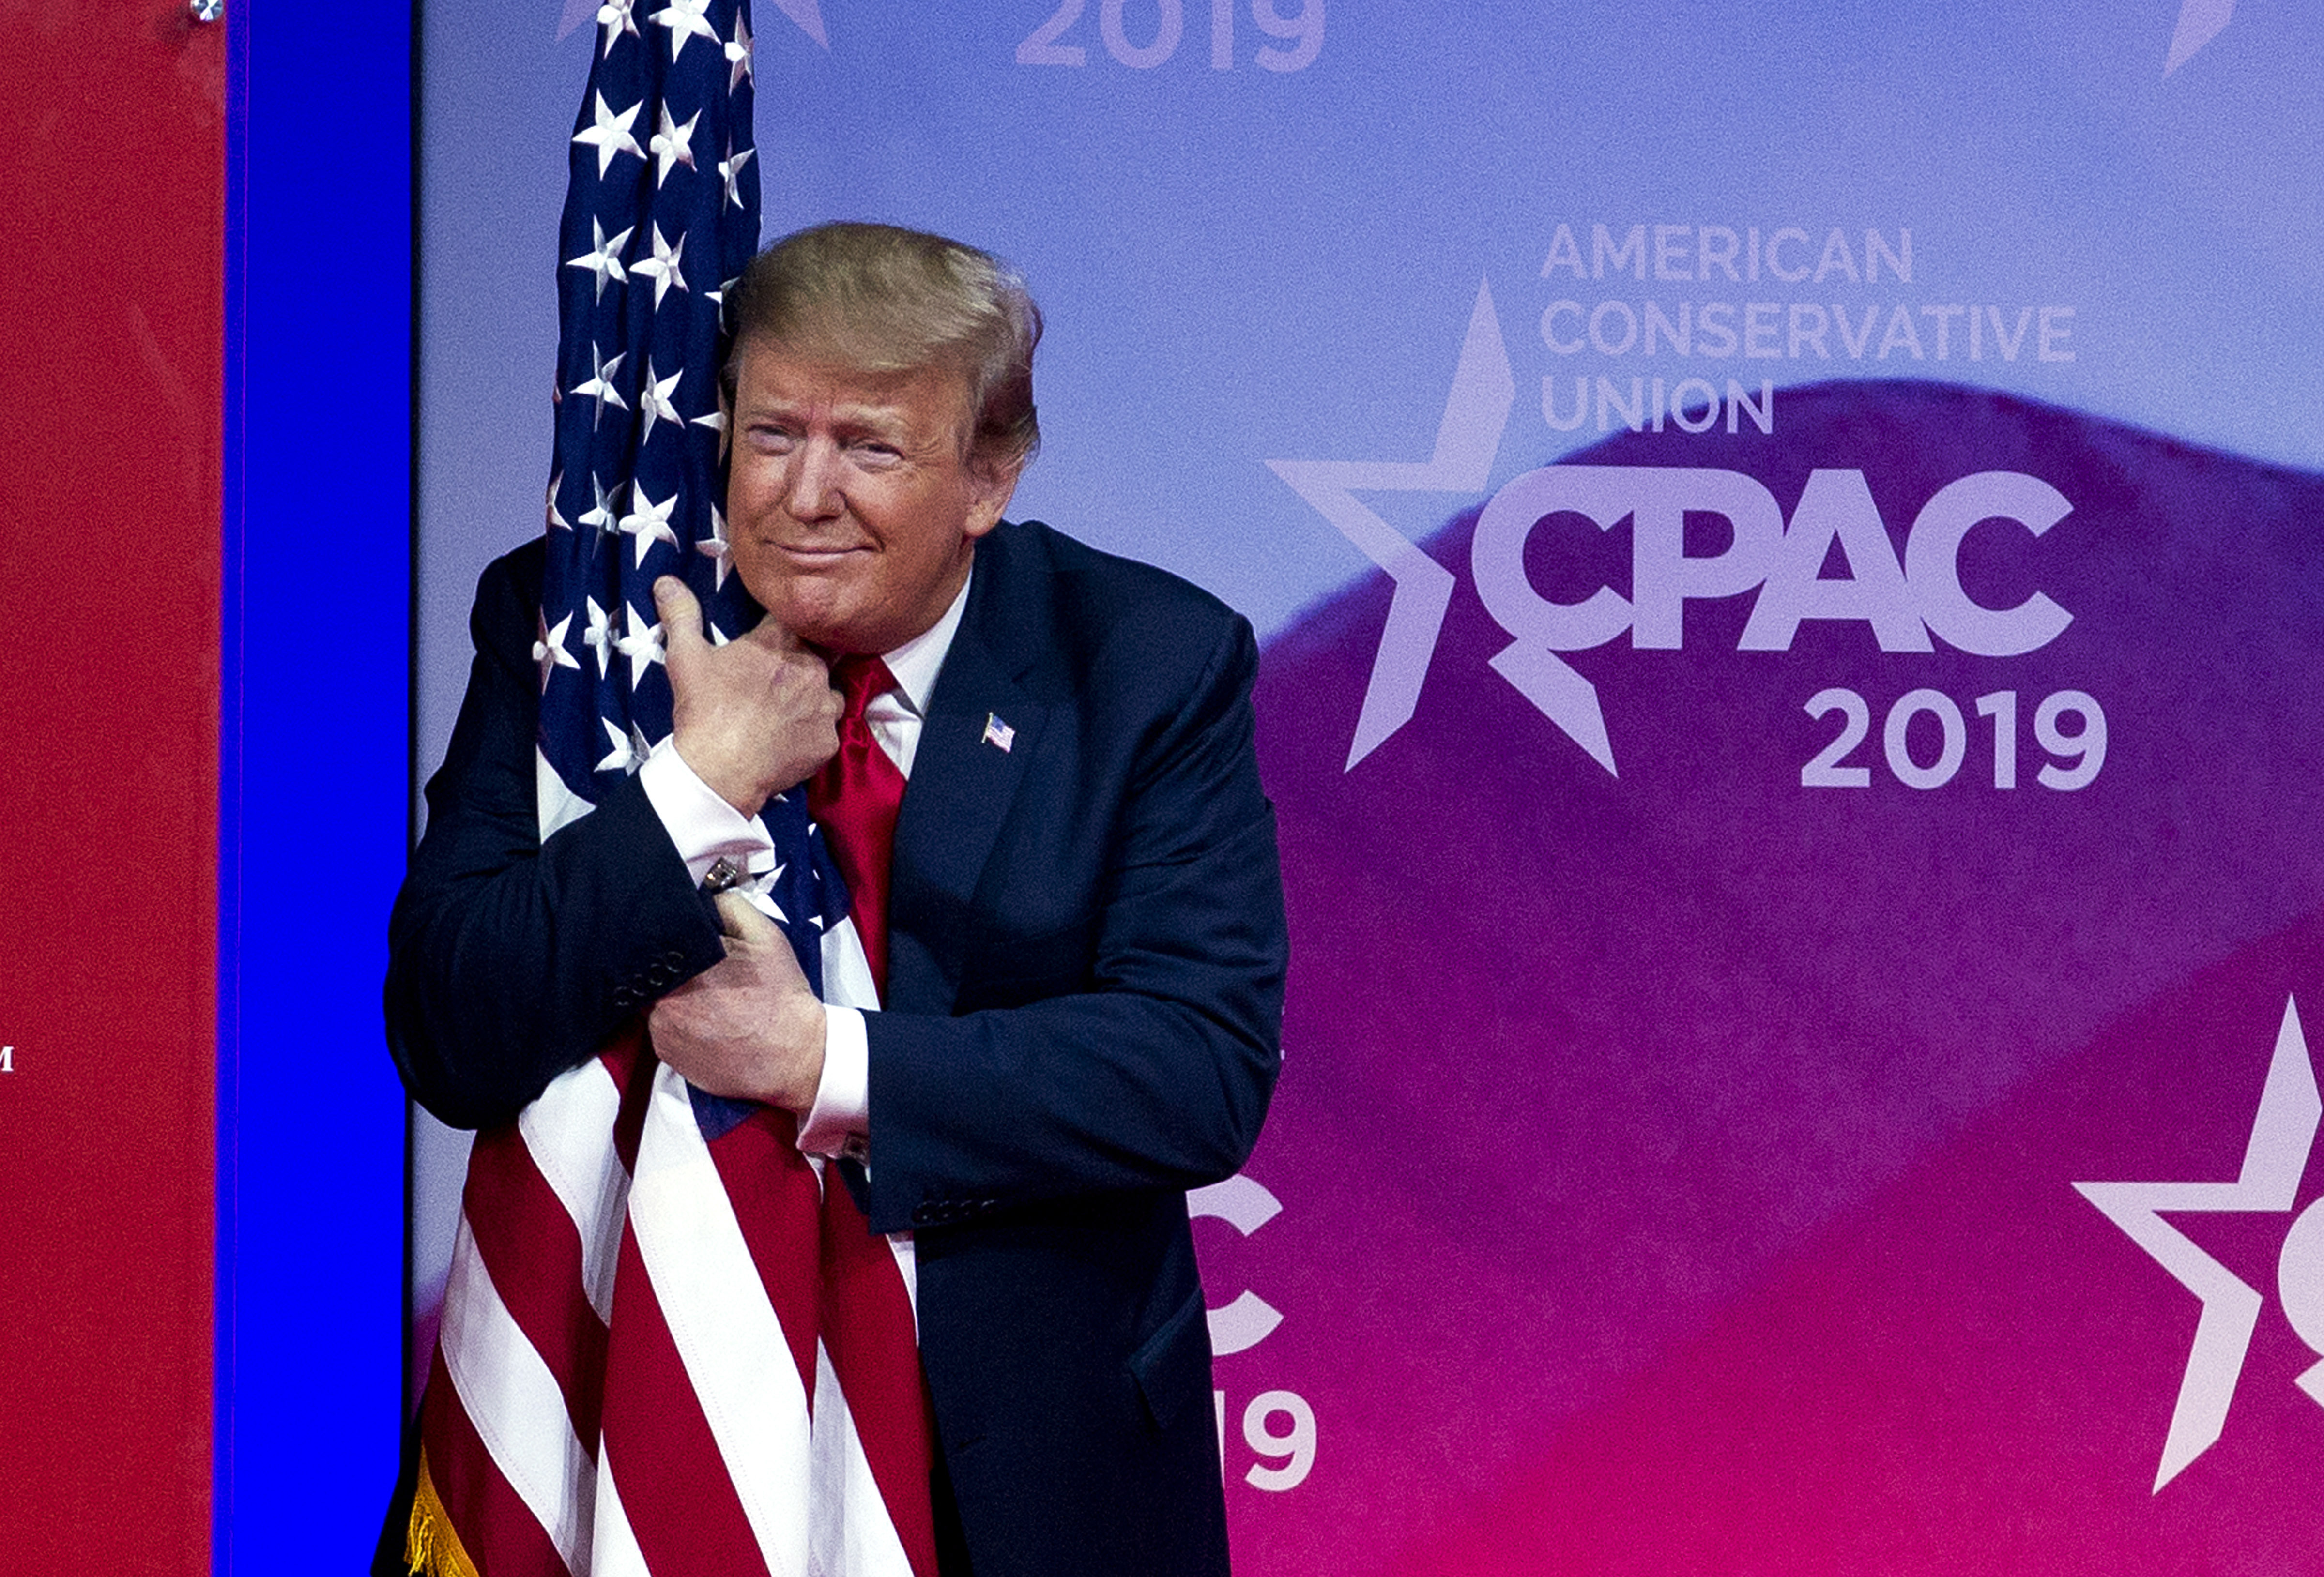 Trump Goes Off-Script at CPAC, Calls Mueller Probe 'Bull----,' Sanders Vows to Defeat 'Dangerous' Trump at Brooklyn Rally